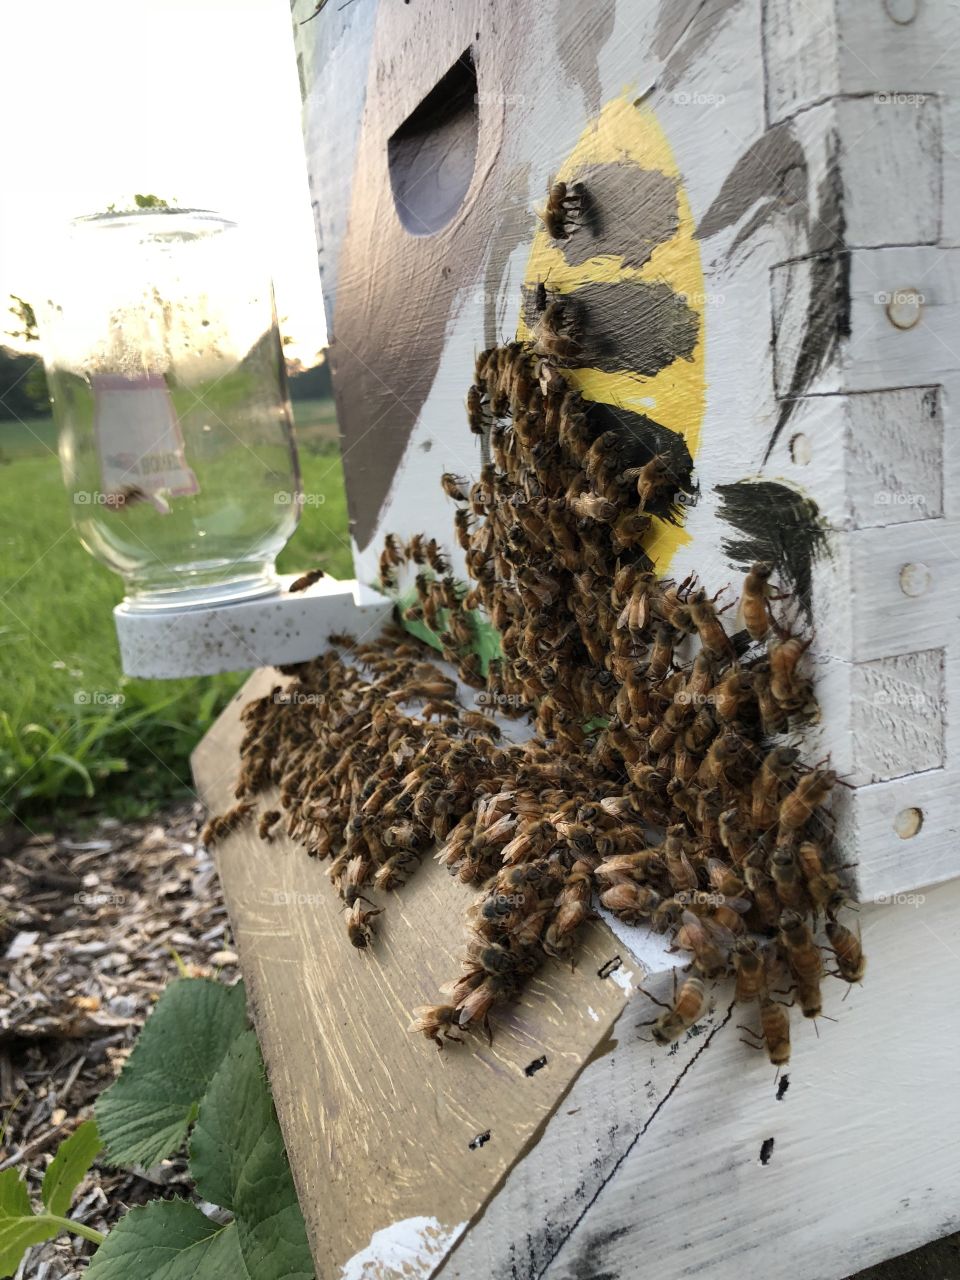 Hot day for bees